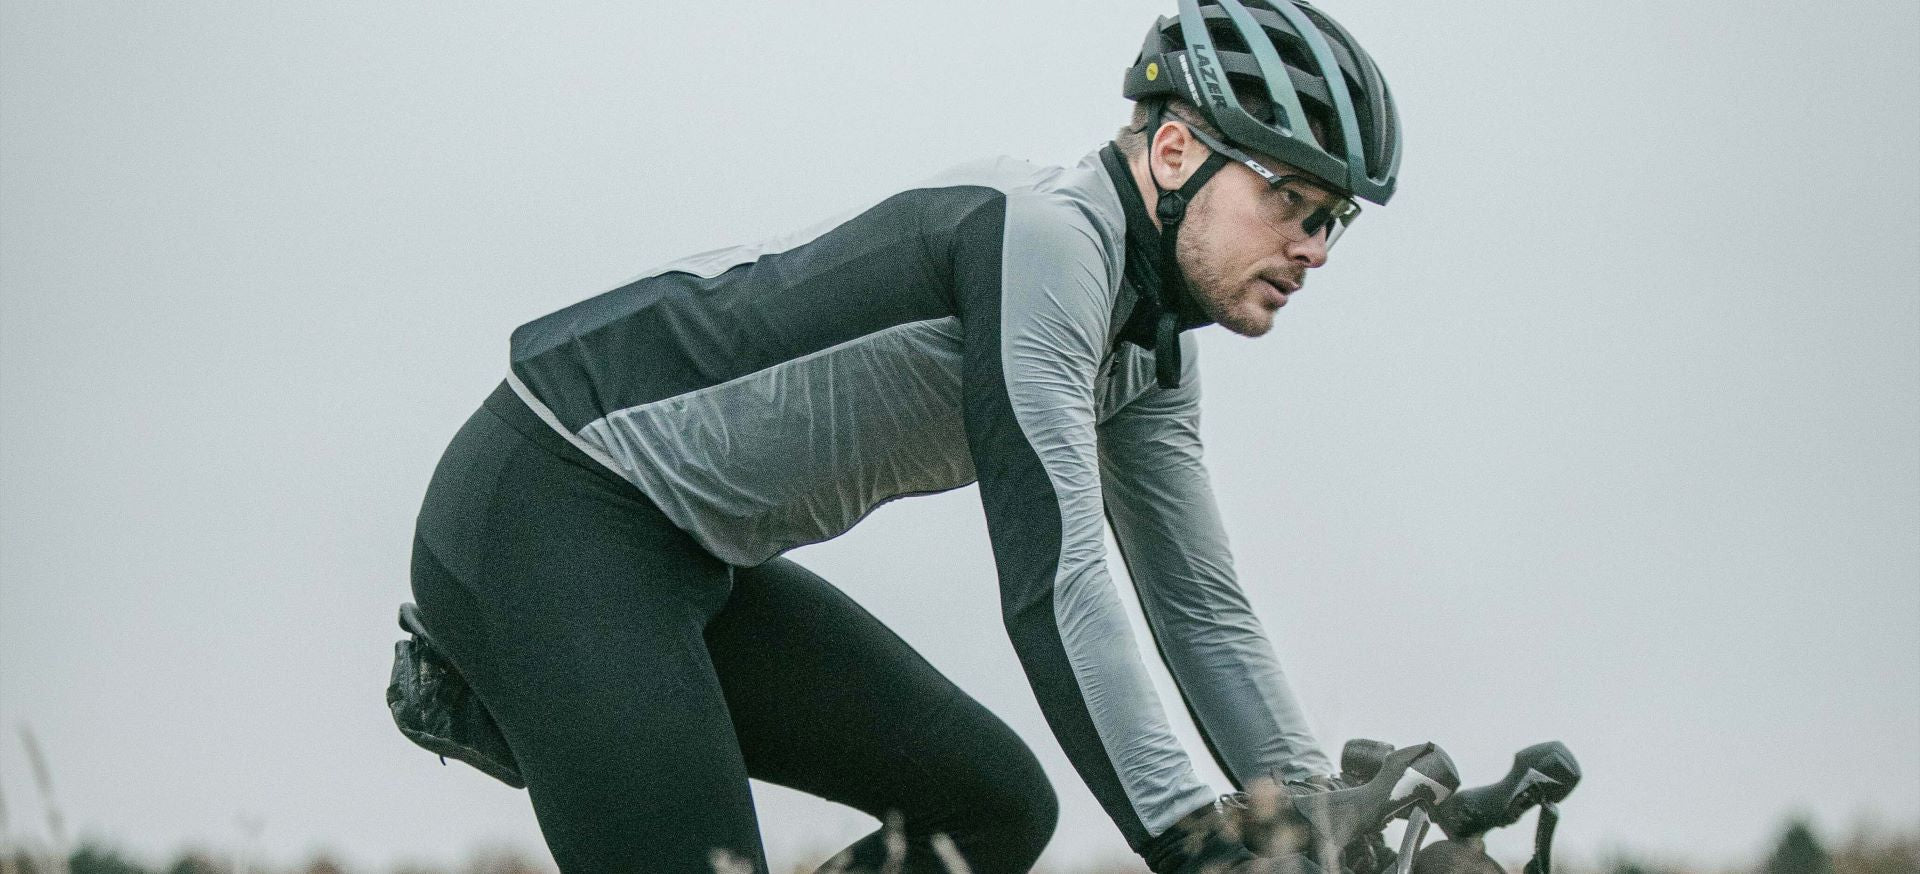 Magliamo : Cycling clothing and Casual Clothing in merino wool